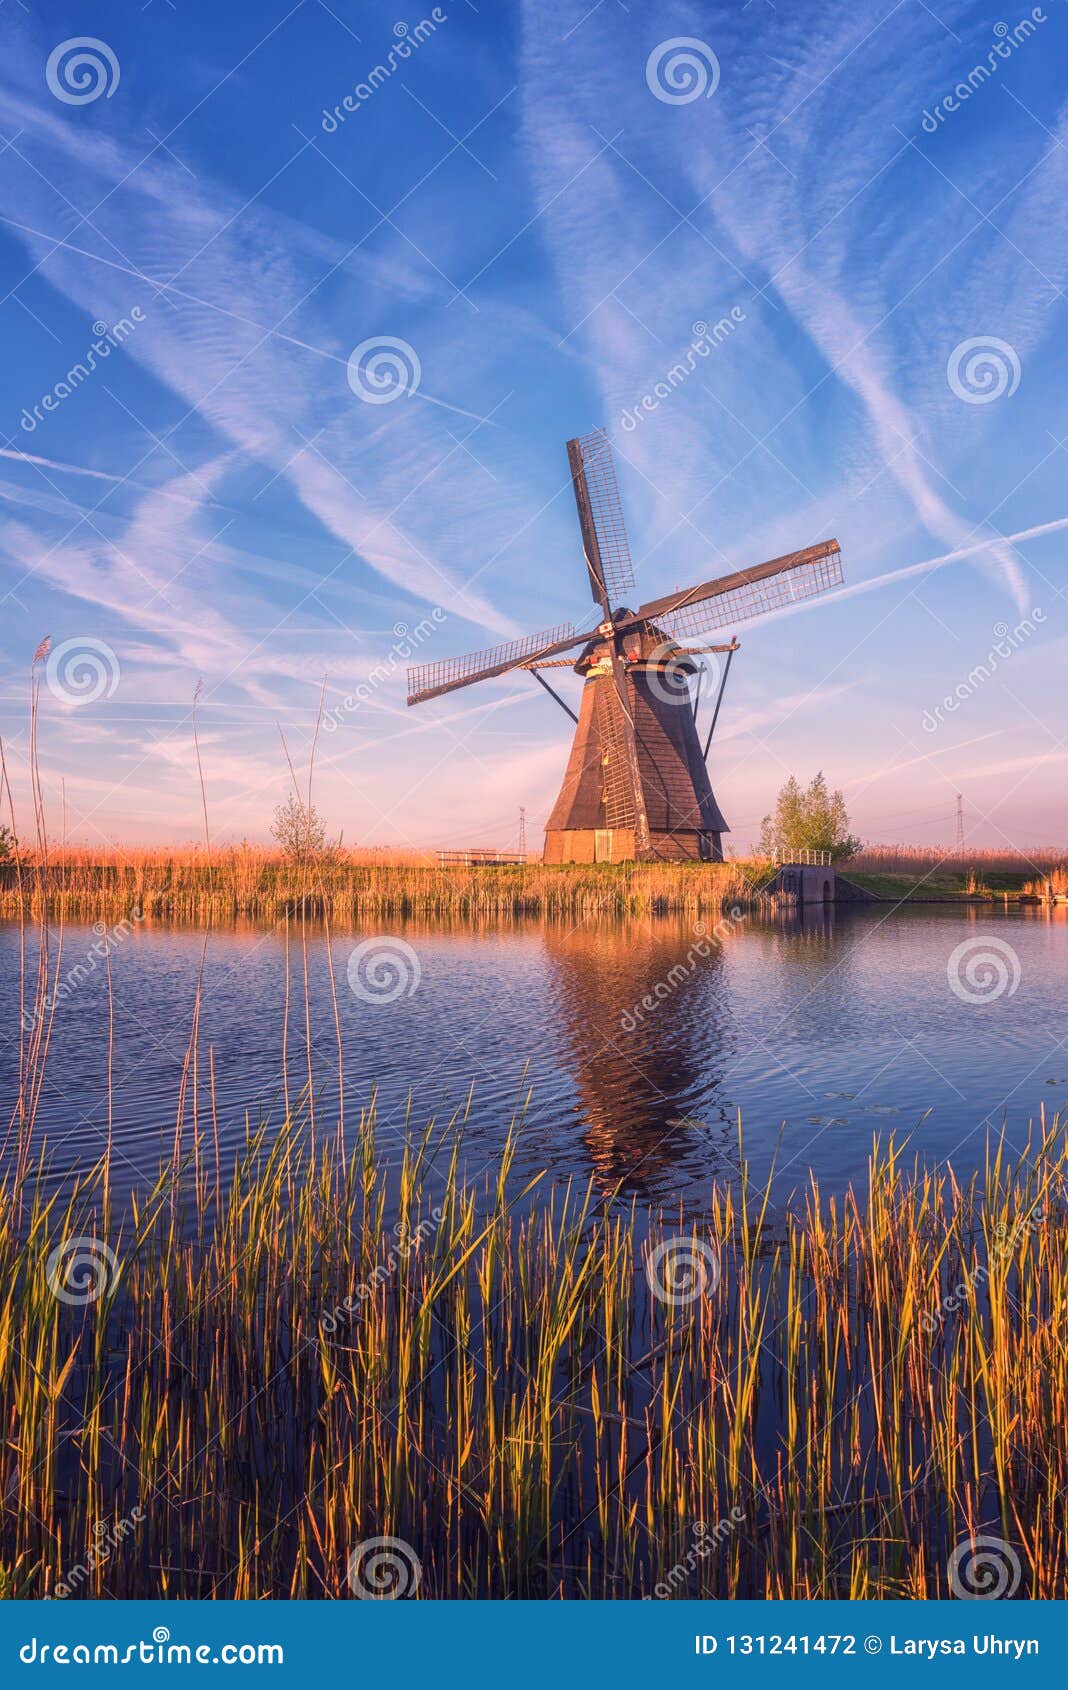 scenic sunset landscape with windmill and sky, traditional dutch village of mills kinderdijk, netherlands